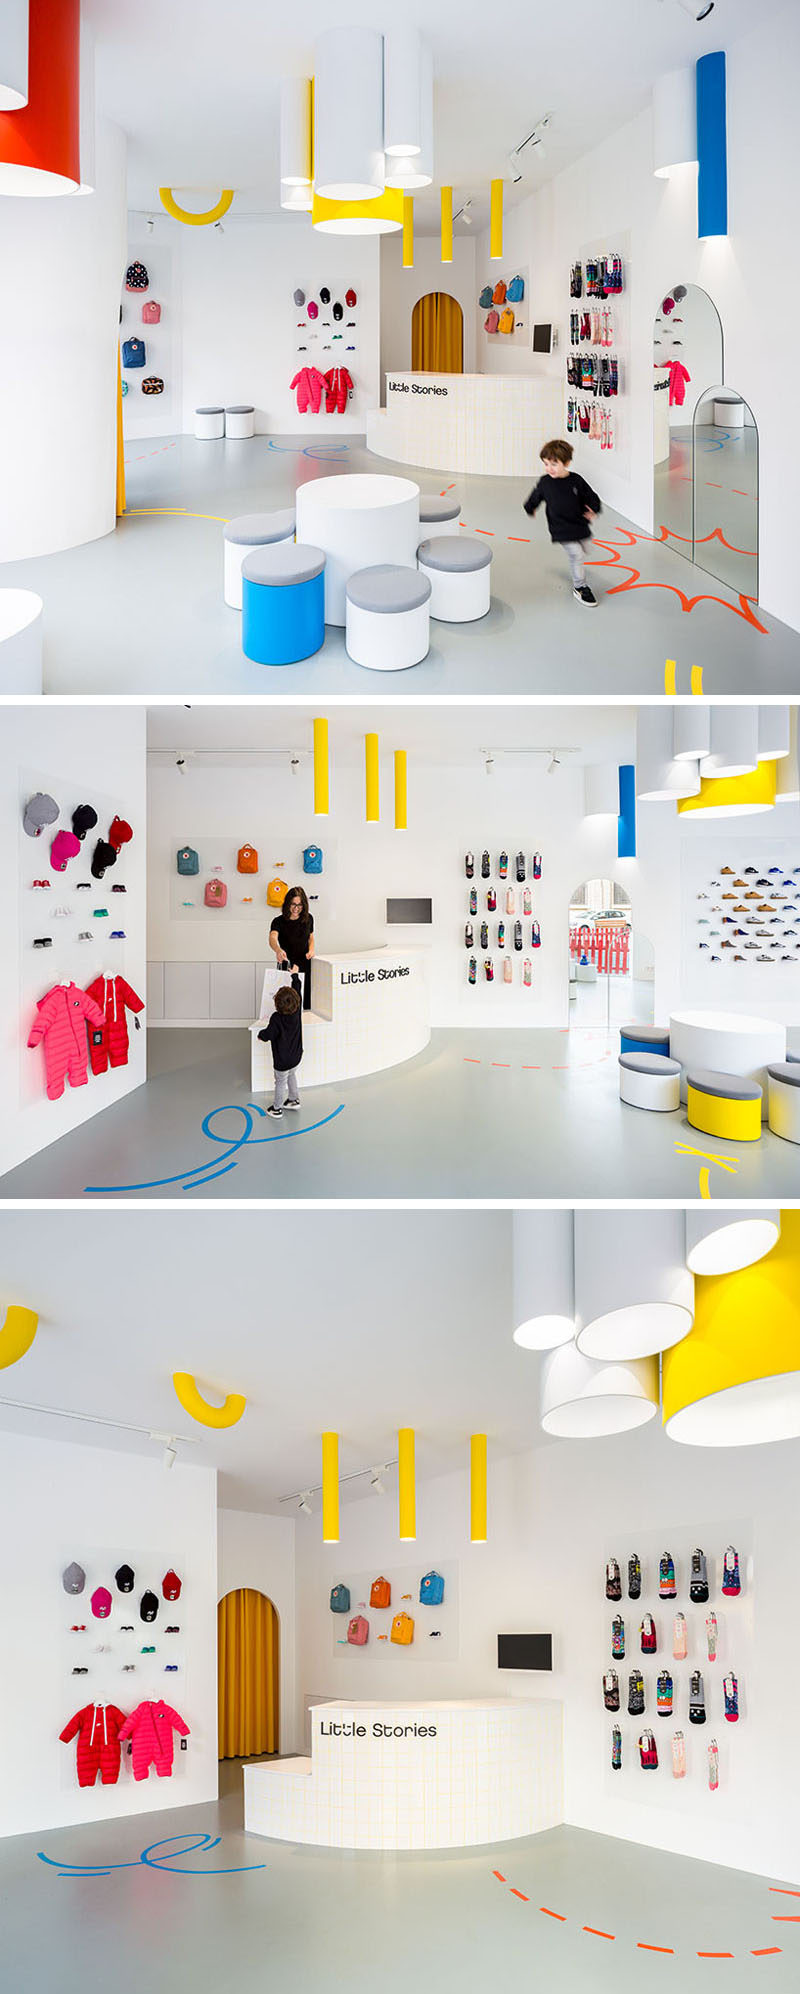 In this modern retail store, a curved sales counter complements the curved shapes of the lighting and display units, while the colorful clothing, shoes and accessories 'pop' against the white background, drawing the eye of potential customers. #ModernRetailStore #WhiteRetailStore